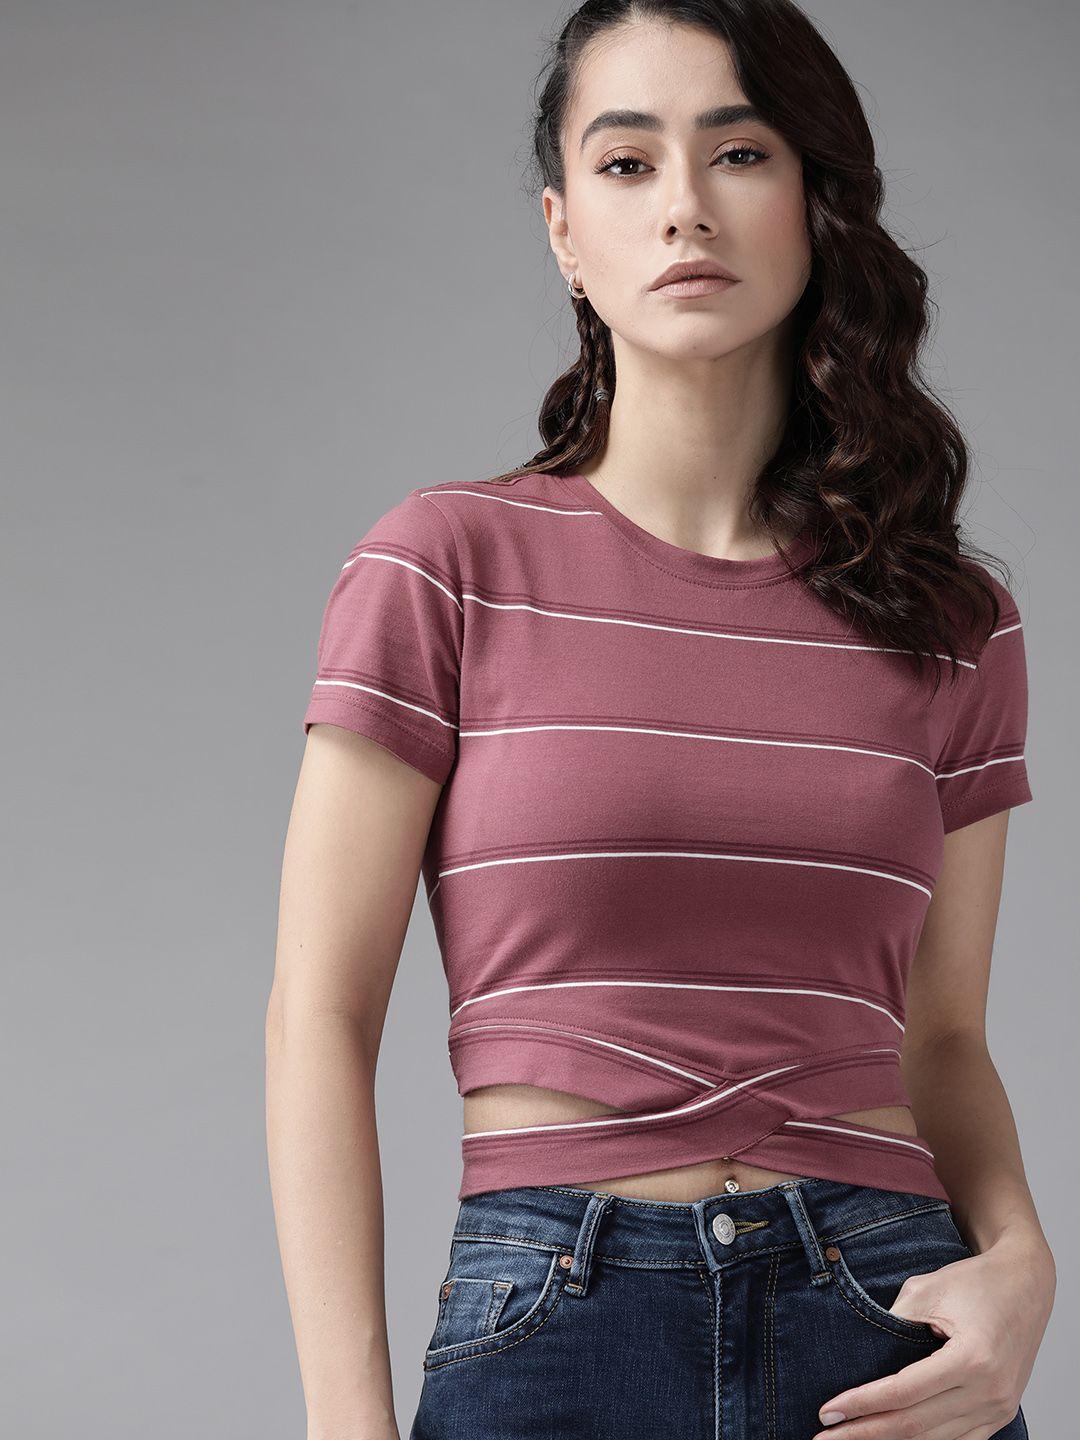 roadster mauve & white striped crop top with cut out detail